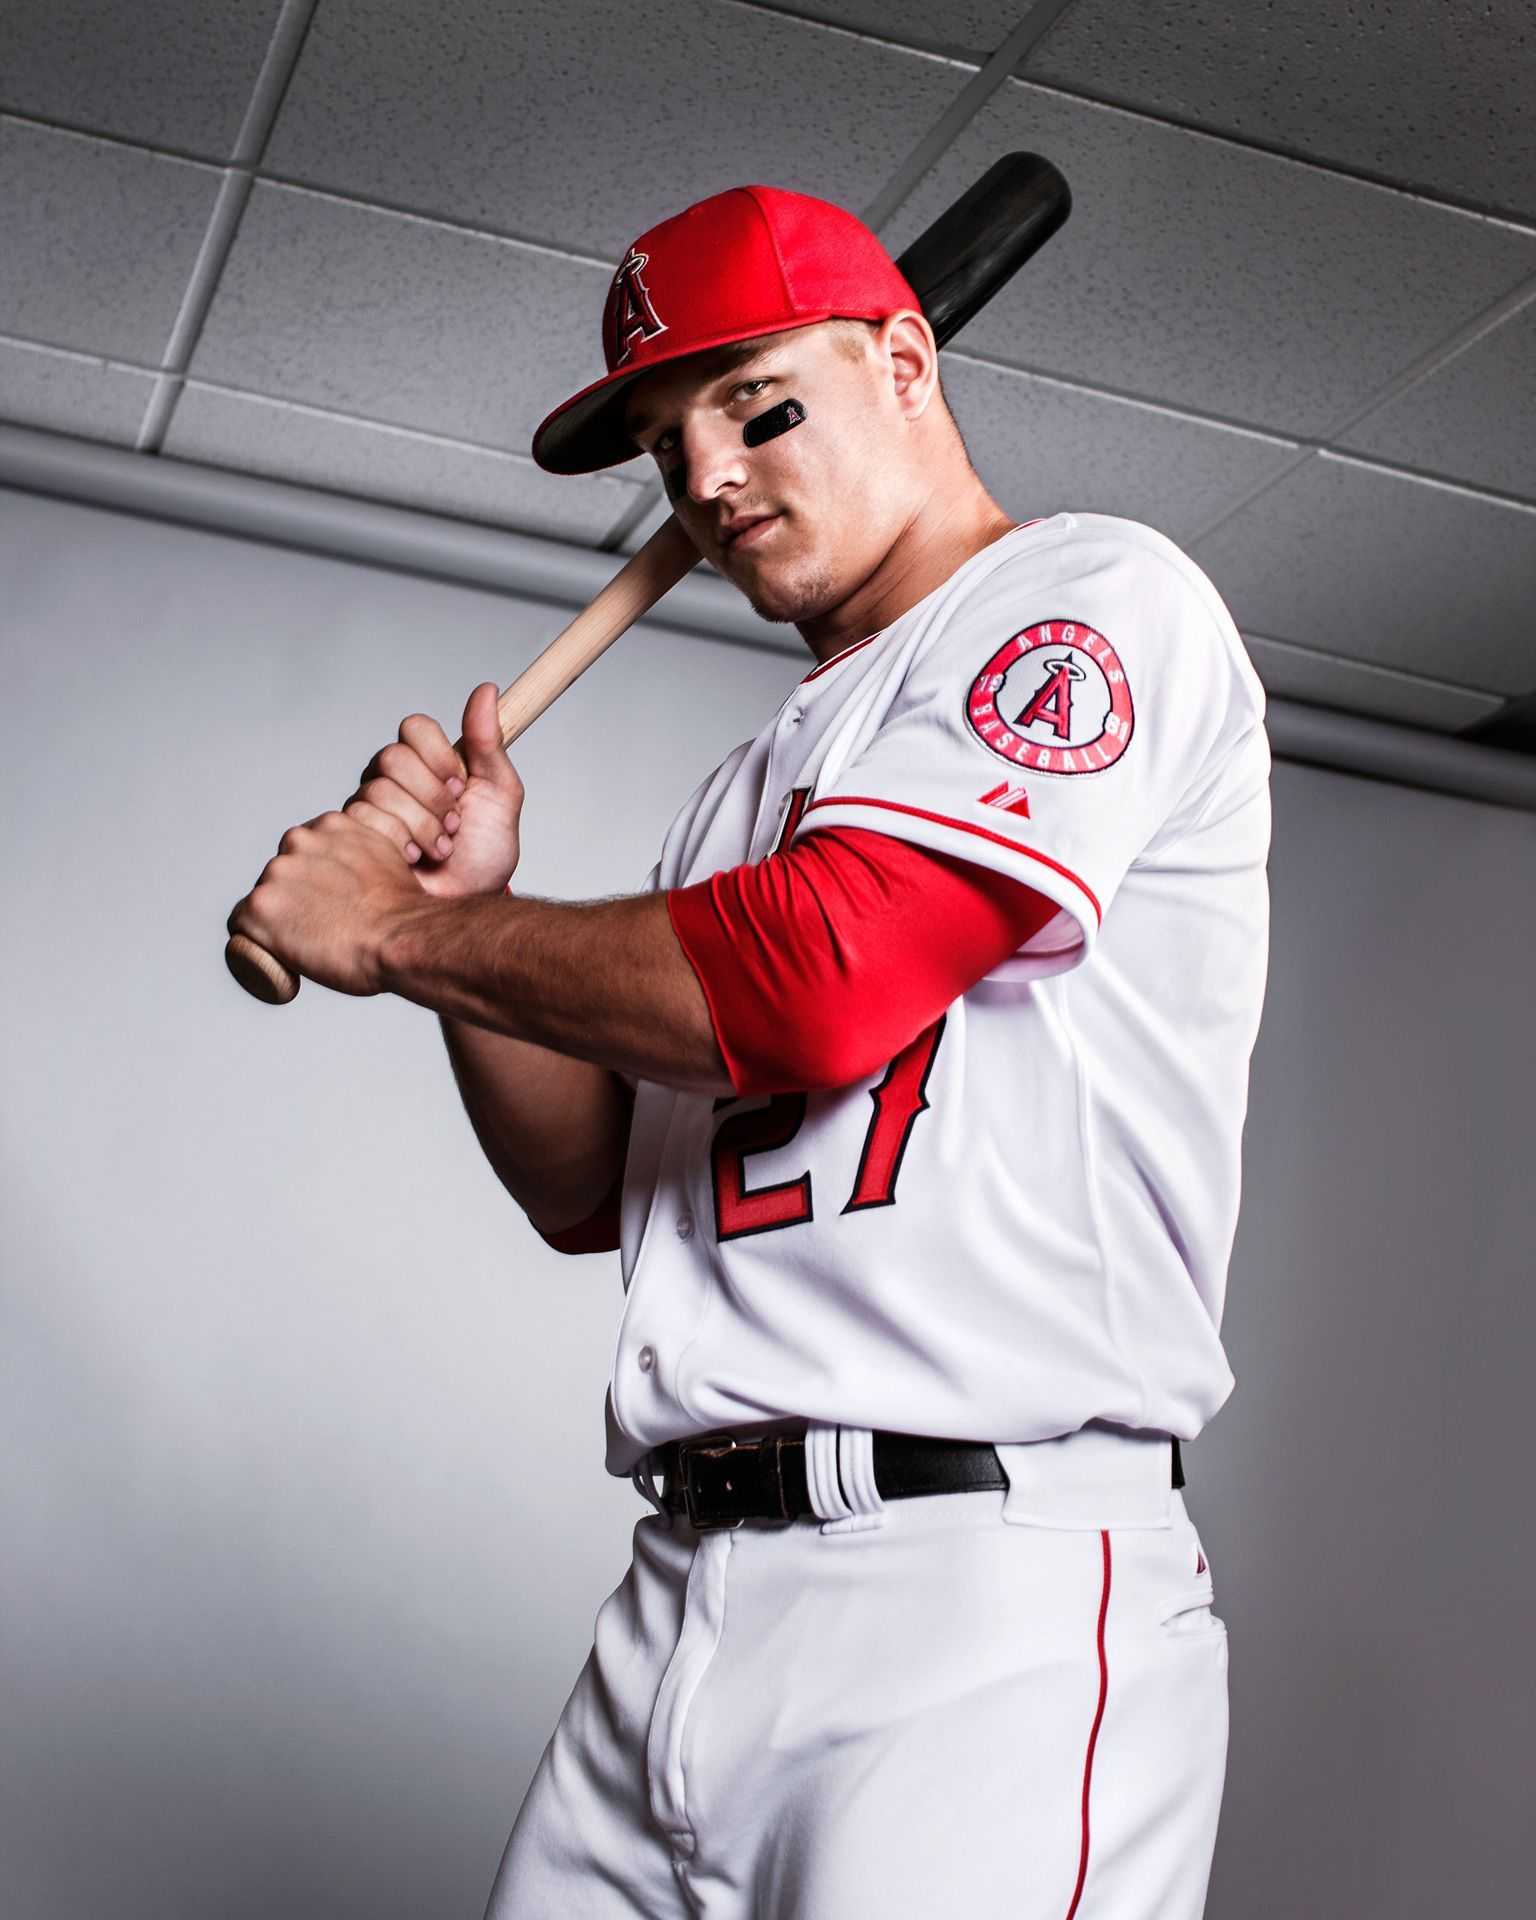 Mike Trout Wallpapers 1